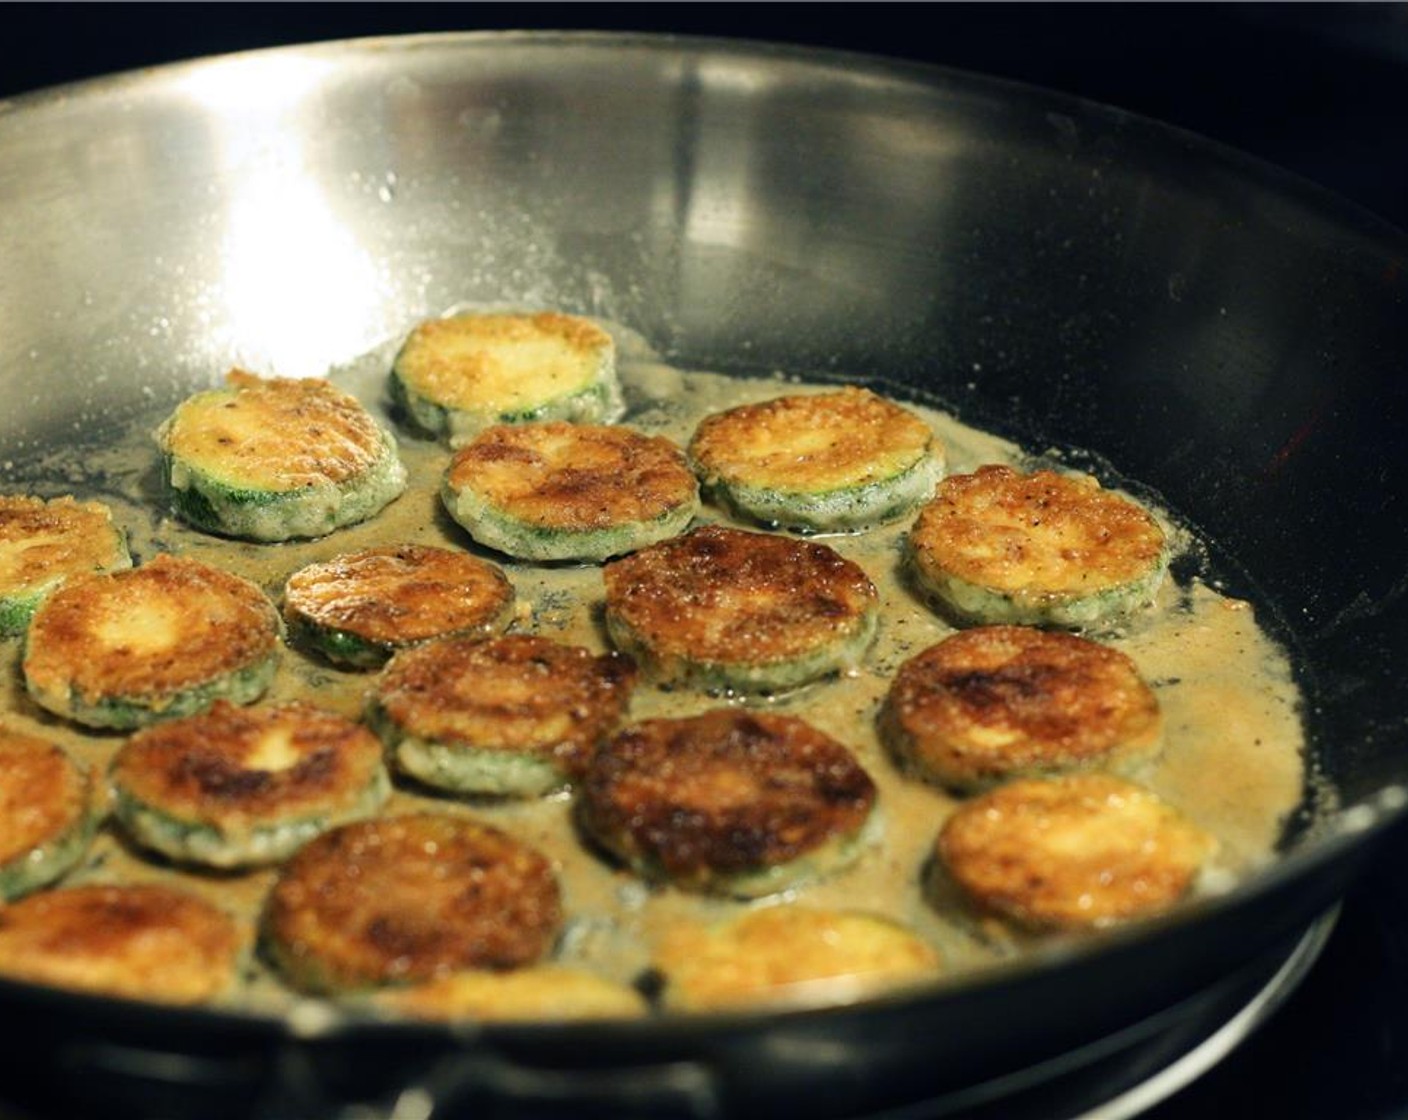 step 5 Add zucchini to the pan forming a single layer. Fry for 4-5 minutes or until bottoms of medallions are golden brown.